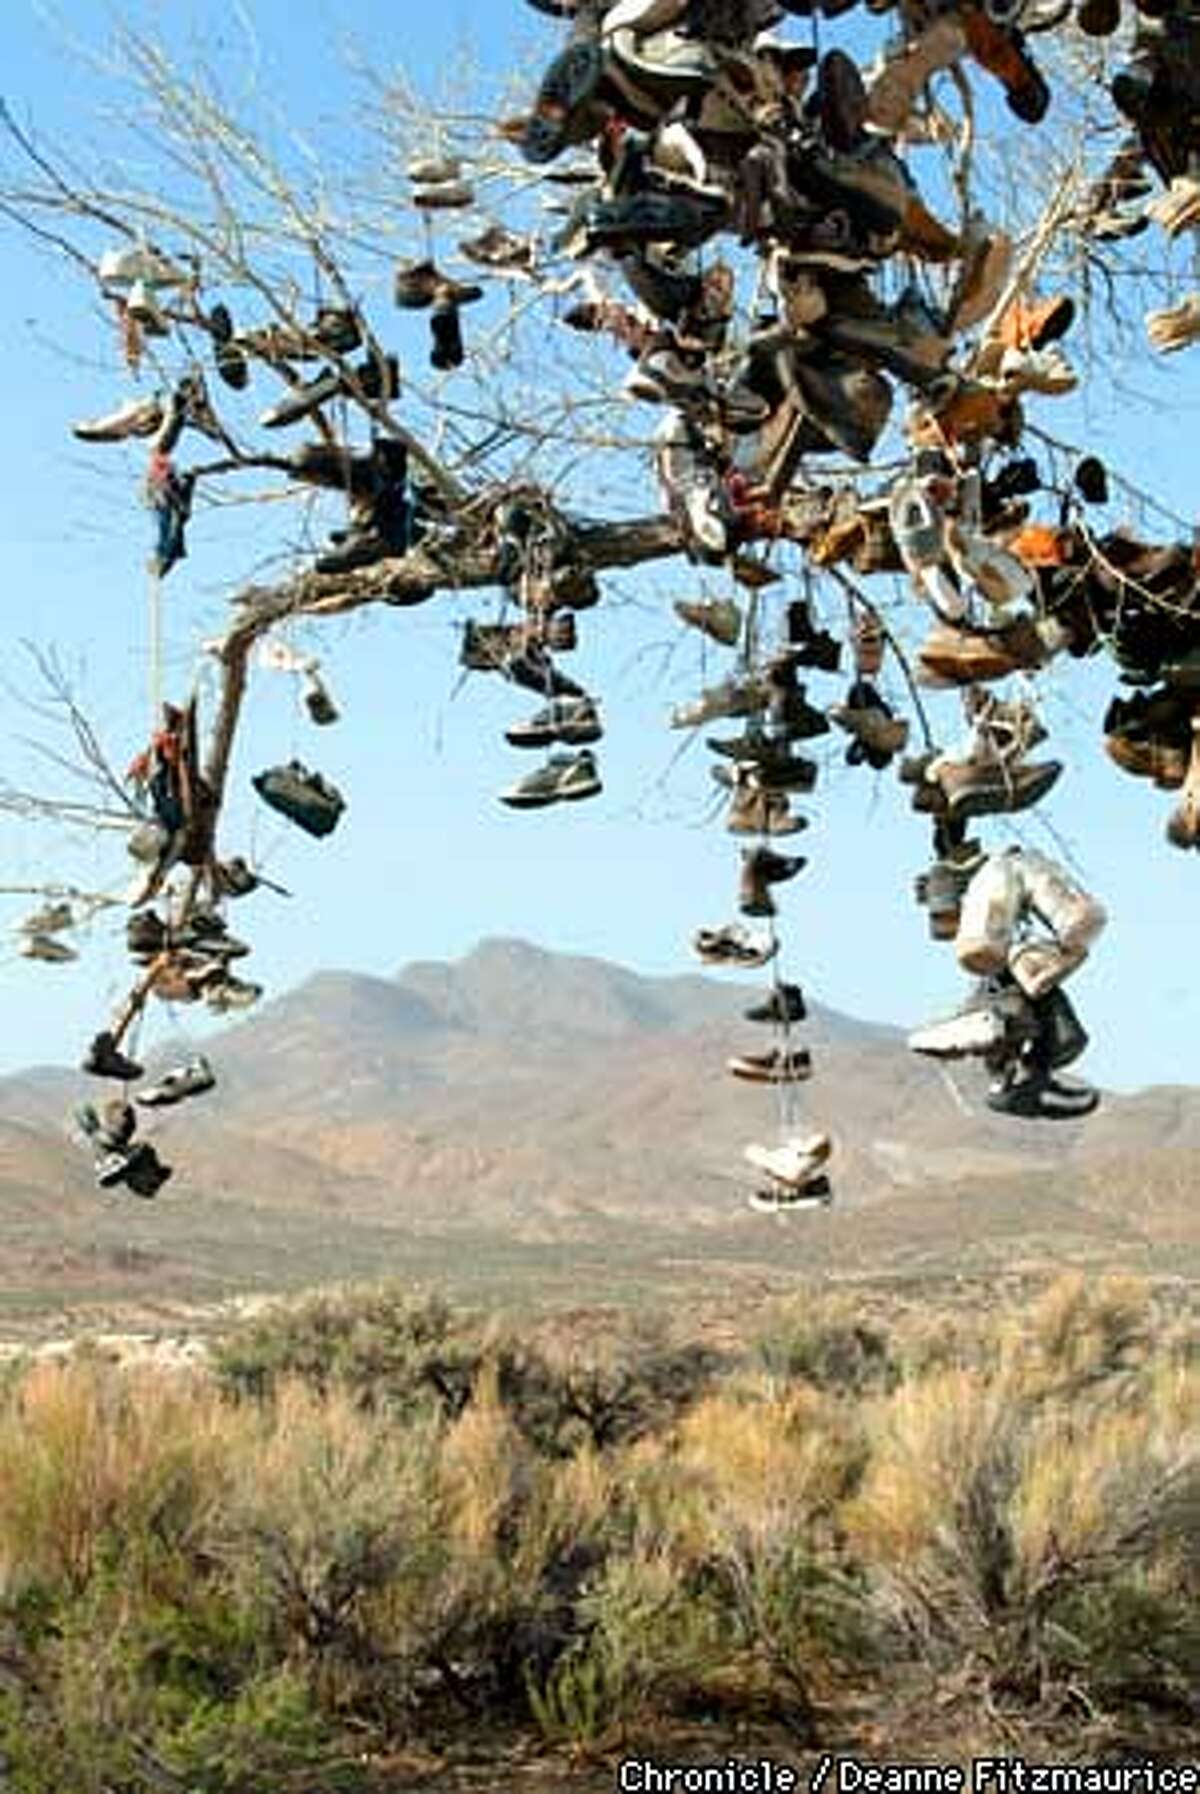 Near Middlegate, alongside Highway 50 in Nevada, known as the "Loneliest Road in America" is what has become known as the "shoetree". It is a cottonwood tree with hundreds of shoes hanging from it. CHRONICLE PHOTO BY DEANNE FITZMAURICE